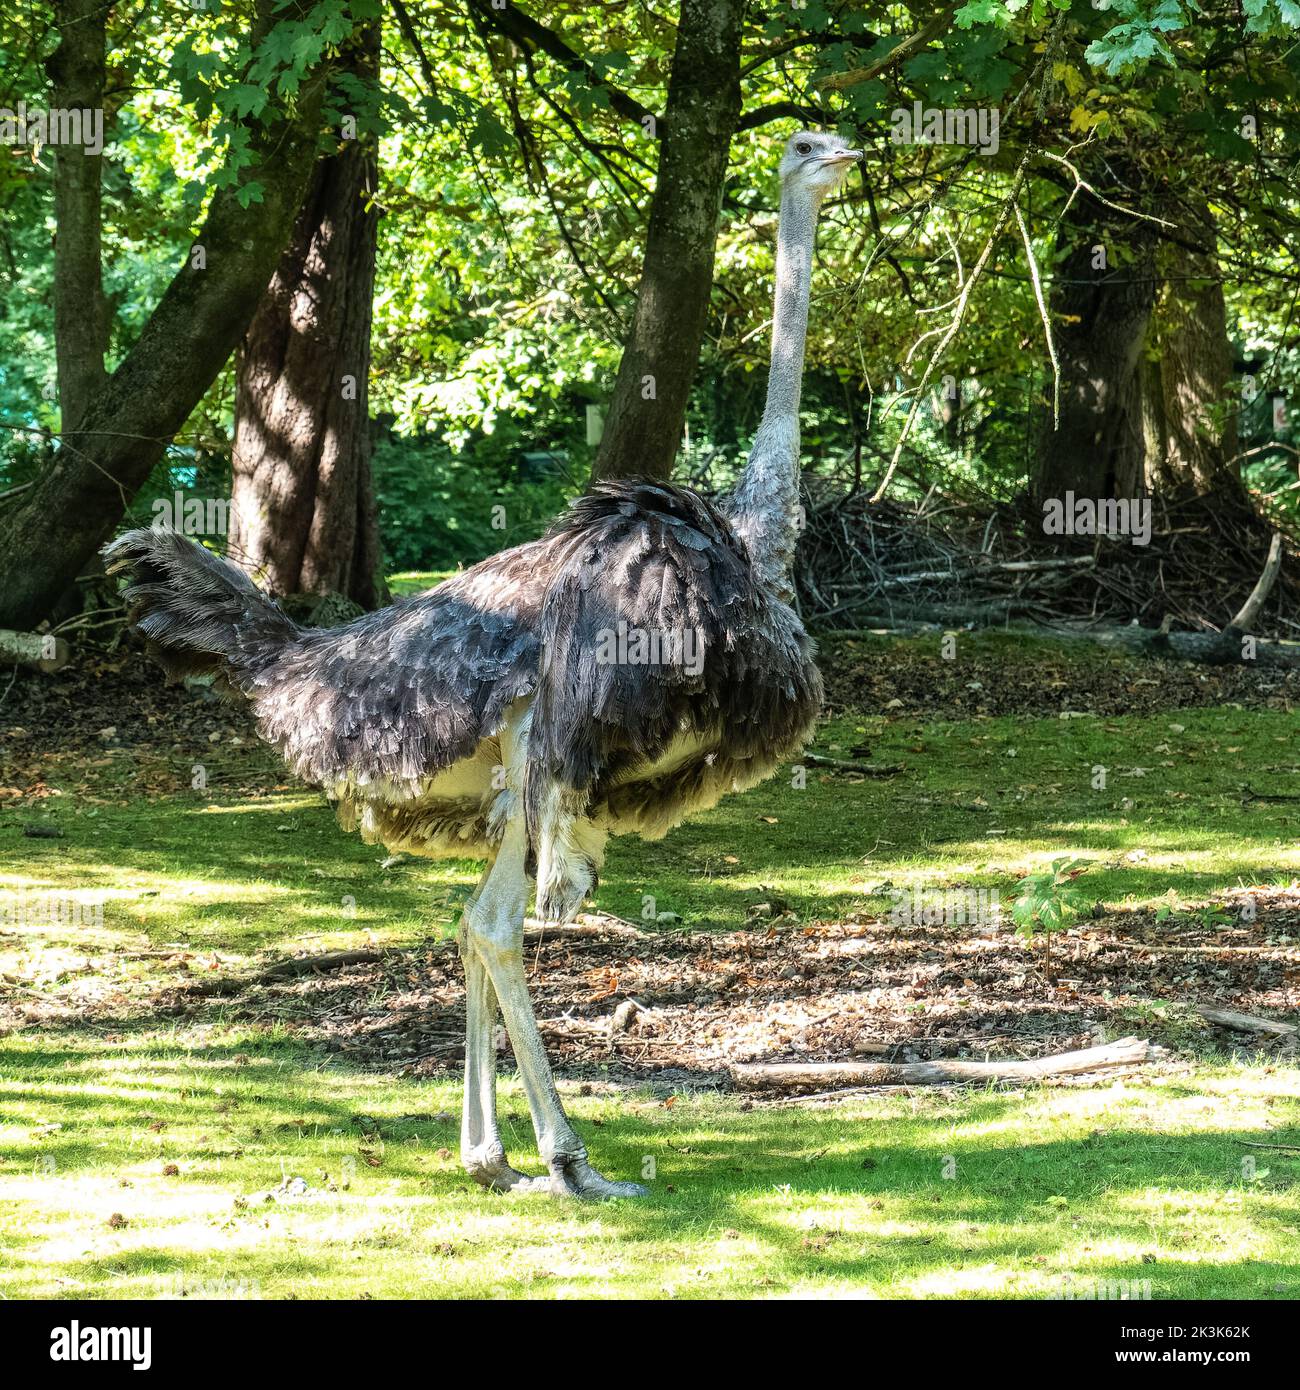 The common ostrich, Struthio camelus, or simply ostrich, is a species of large flightless bird native to Africa. It is one of two extant species of os Stock Photo